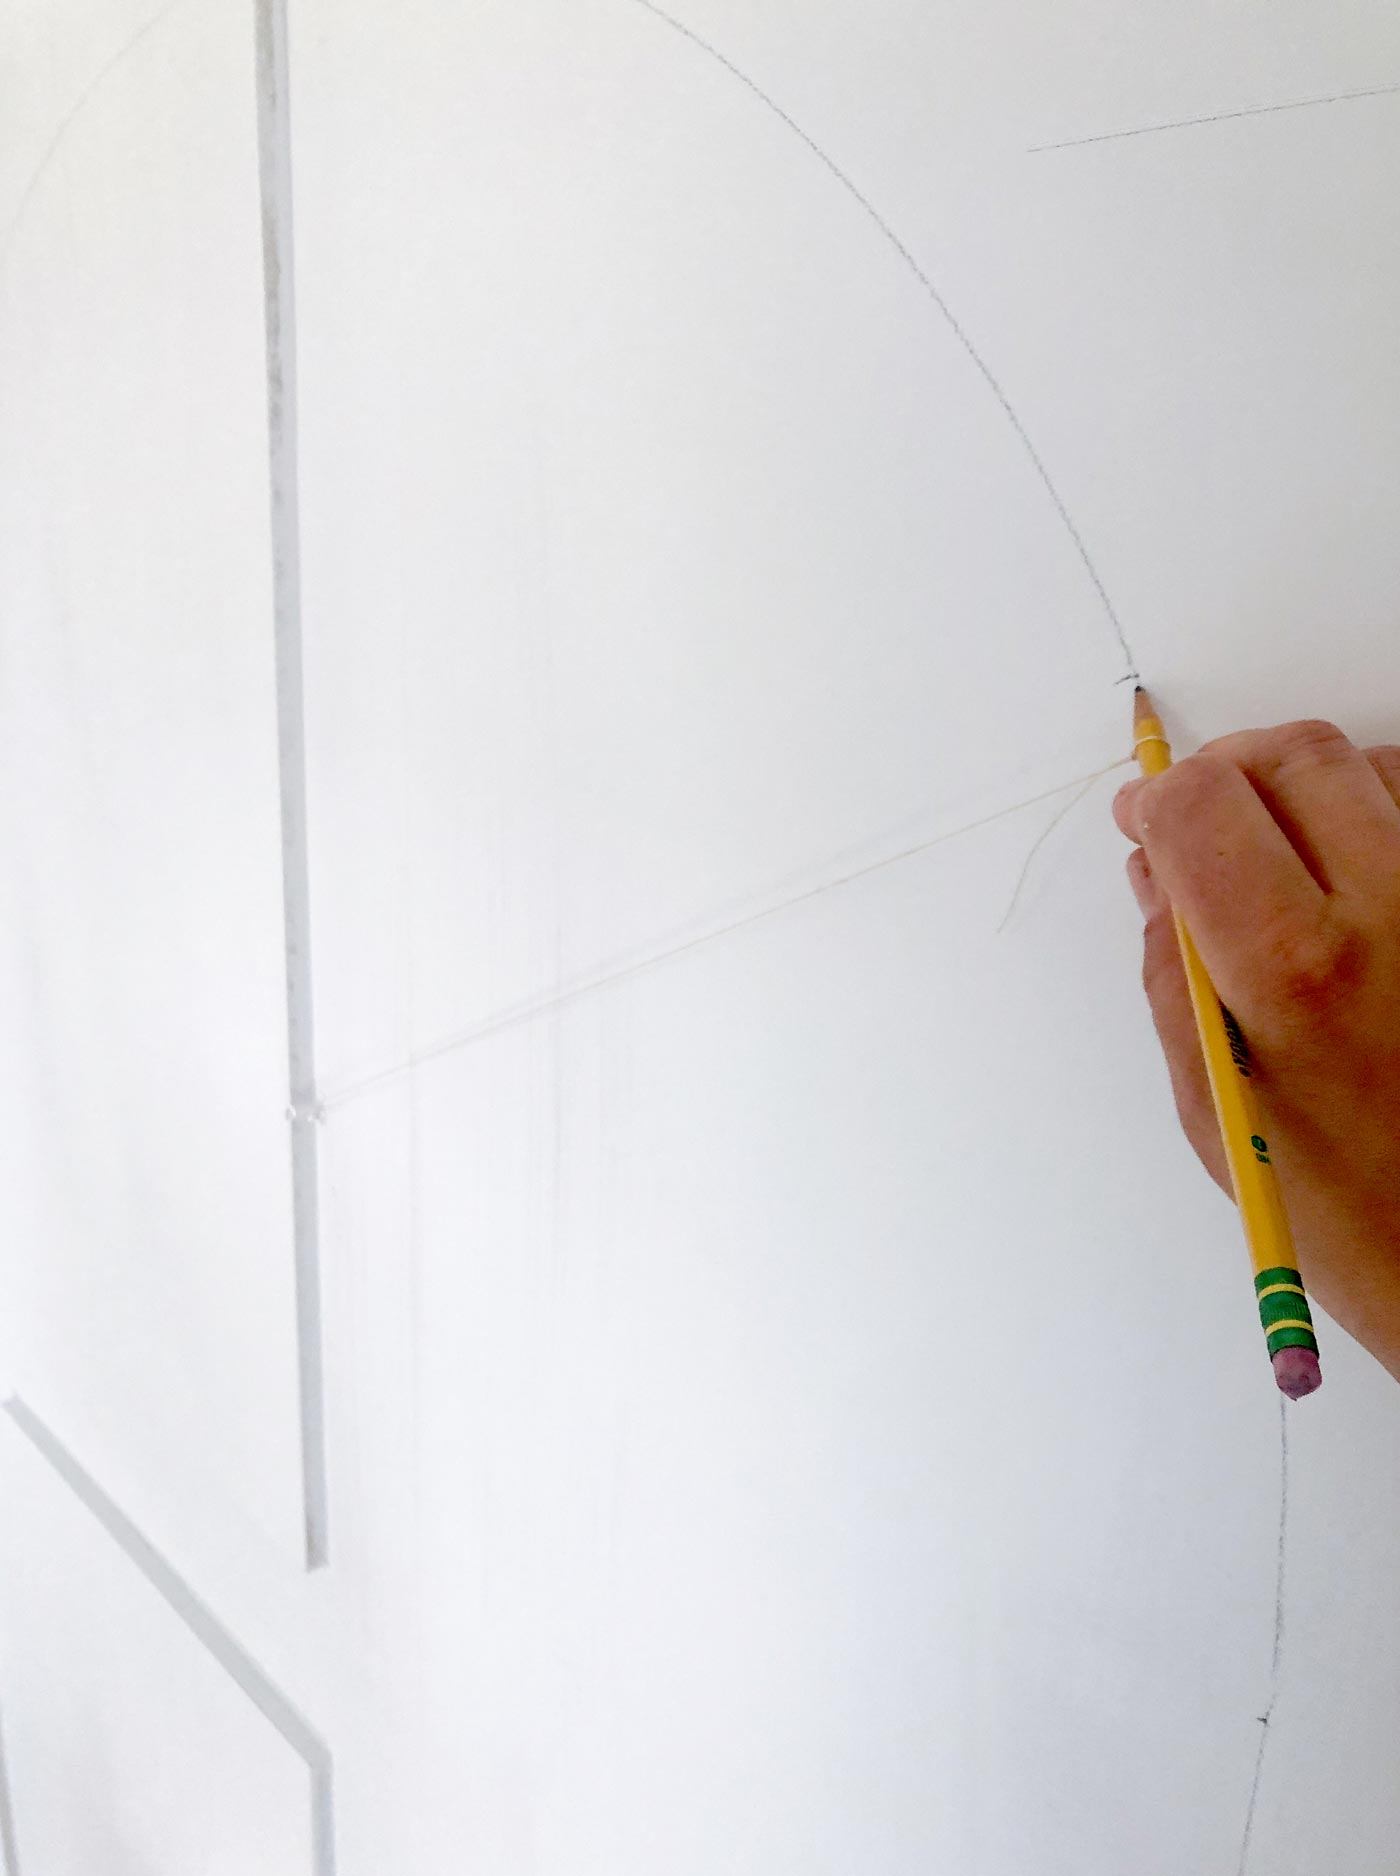 tracing-an-arch-using-a-thumbtack-string-and-pencil